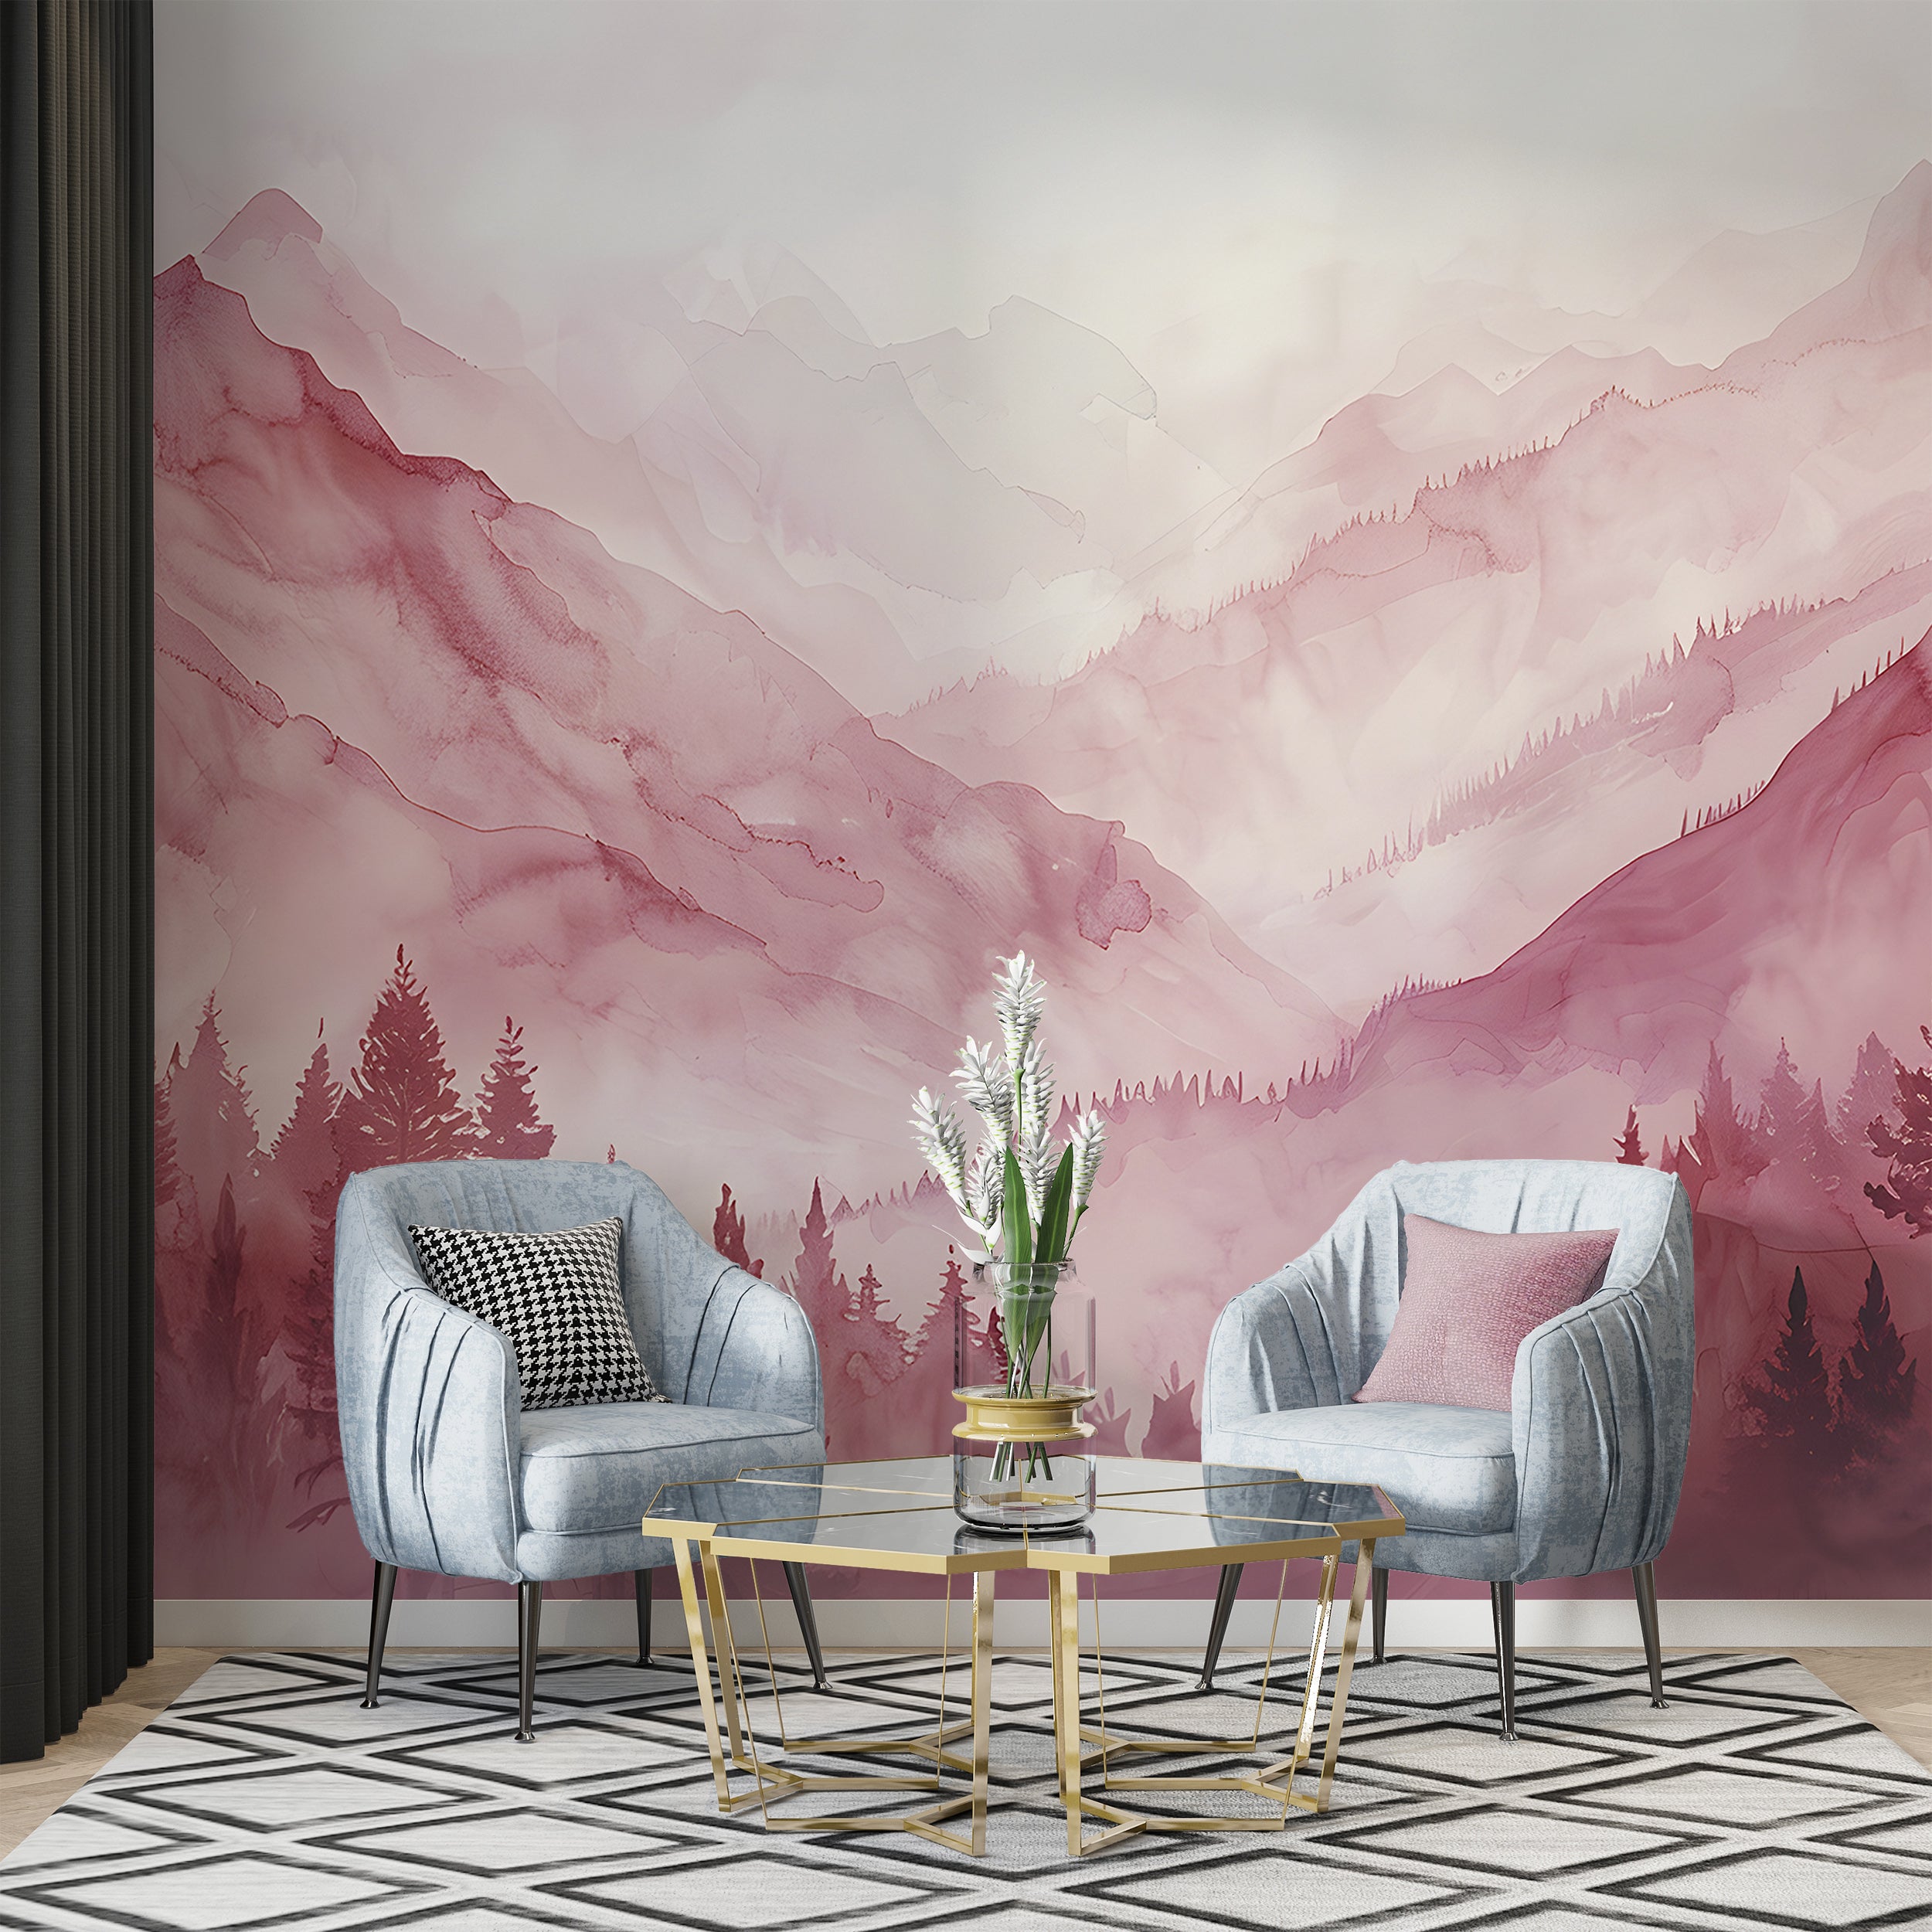 Pink Nursery Landscape Wallpaper, Watercolor Mountain View Mural, Peel and Abstract Stick Forests and Mountains Wall Mural, Soft Pink Nature Art